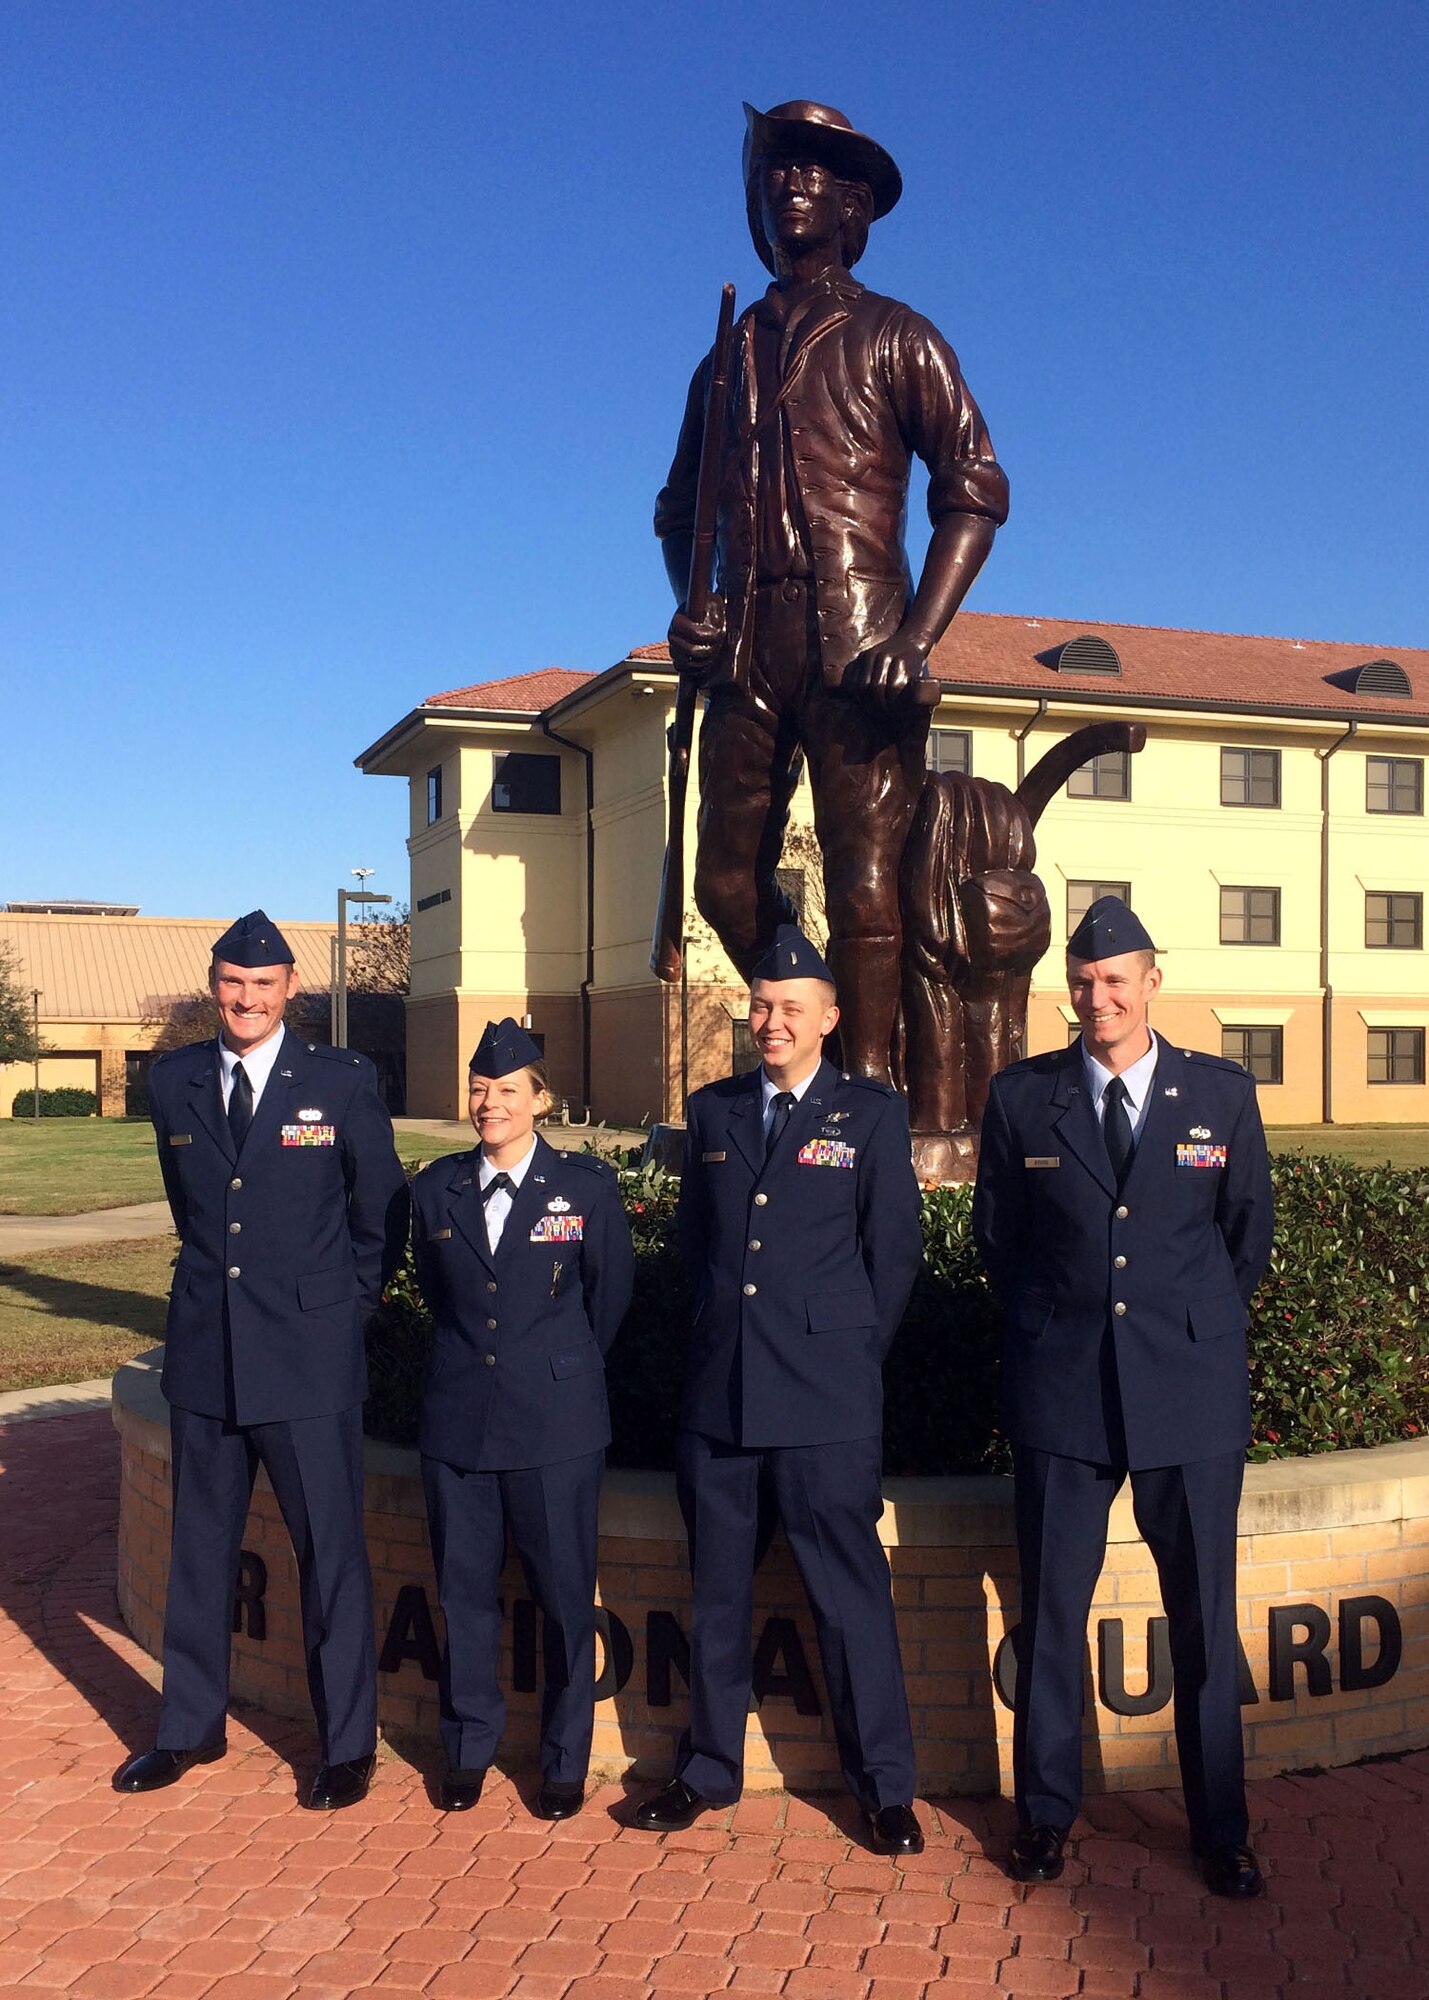 120th Airlift Wing 2nd Lieutenants Matthew Hall, Alissa Engel, Bradford Lewis, and Joshua Briggs pose at the statue to the Air National Guard minuteman located on the campus of the Officer Training School at Maxwell Air Force Base, Ala. Dec. 18, 2015. (U.S. Air National Guard photo by Capt. Kenneth Fechter/Released)